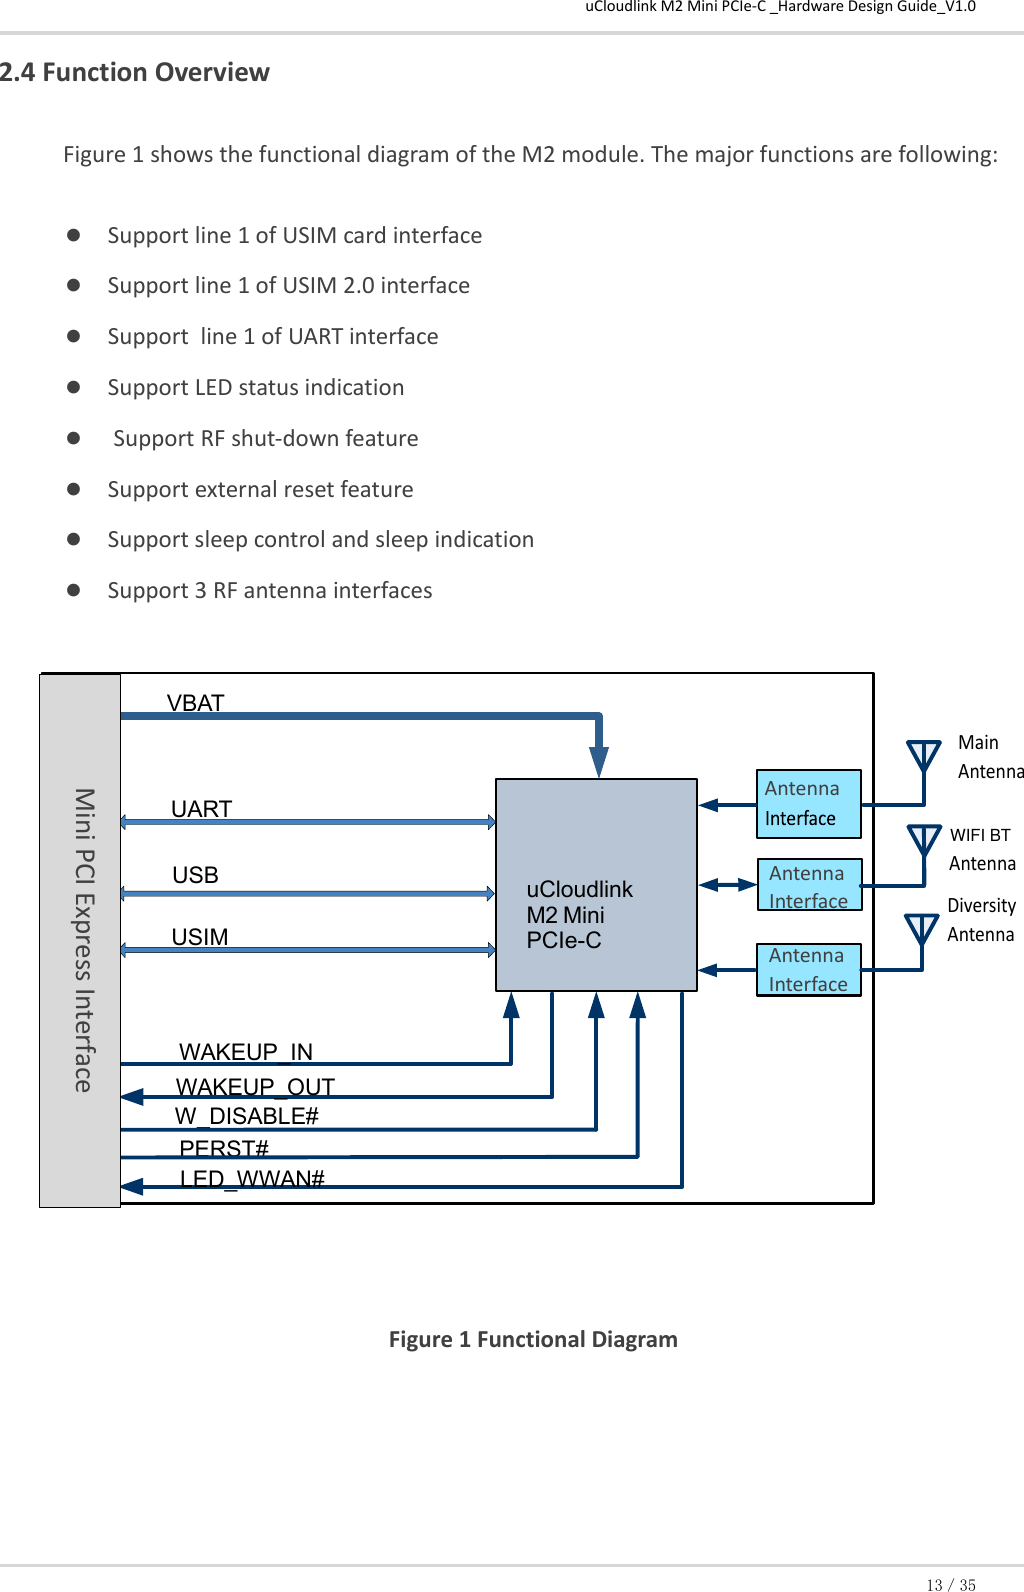 uCloudlink M2 Mini PCIe-C _Hardware Design Guide_V1.0 13／35 2.4 Function Overview Figure 1 shows the functional diagram of the M2 module. The major functions are following:  Support line 1 of USIM card interface  Support line 1 of USIM 2.0 interface  Support  line 1 of UART interface  Support LED status indication    Support RF shut-down feature   Support external reset feature  Support sleep control and sleep indication   Support 3 RF antenna interfaces     Figure 1 Functional Diagram     uCloudlink   M2   Mini PCIe-C UART USB W_DISABLE# PERST# LED_WWAN# Antenna Interface VBAT   USIM WAKEUP_OUT WAKEUP_IN Mini PCI Express Interface Antenna Interface  Main Antenna Diversity Antenna Antenna WIFI BT Antenna